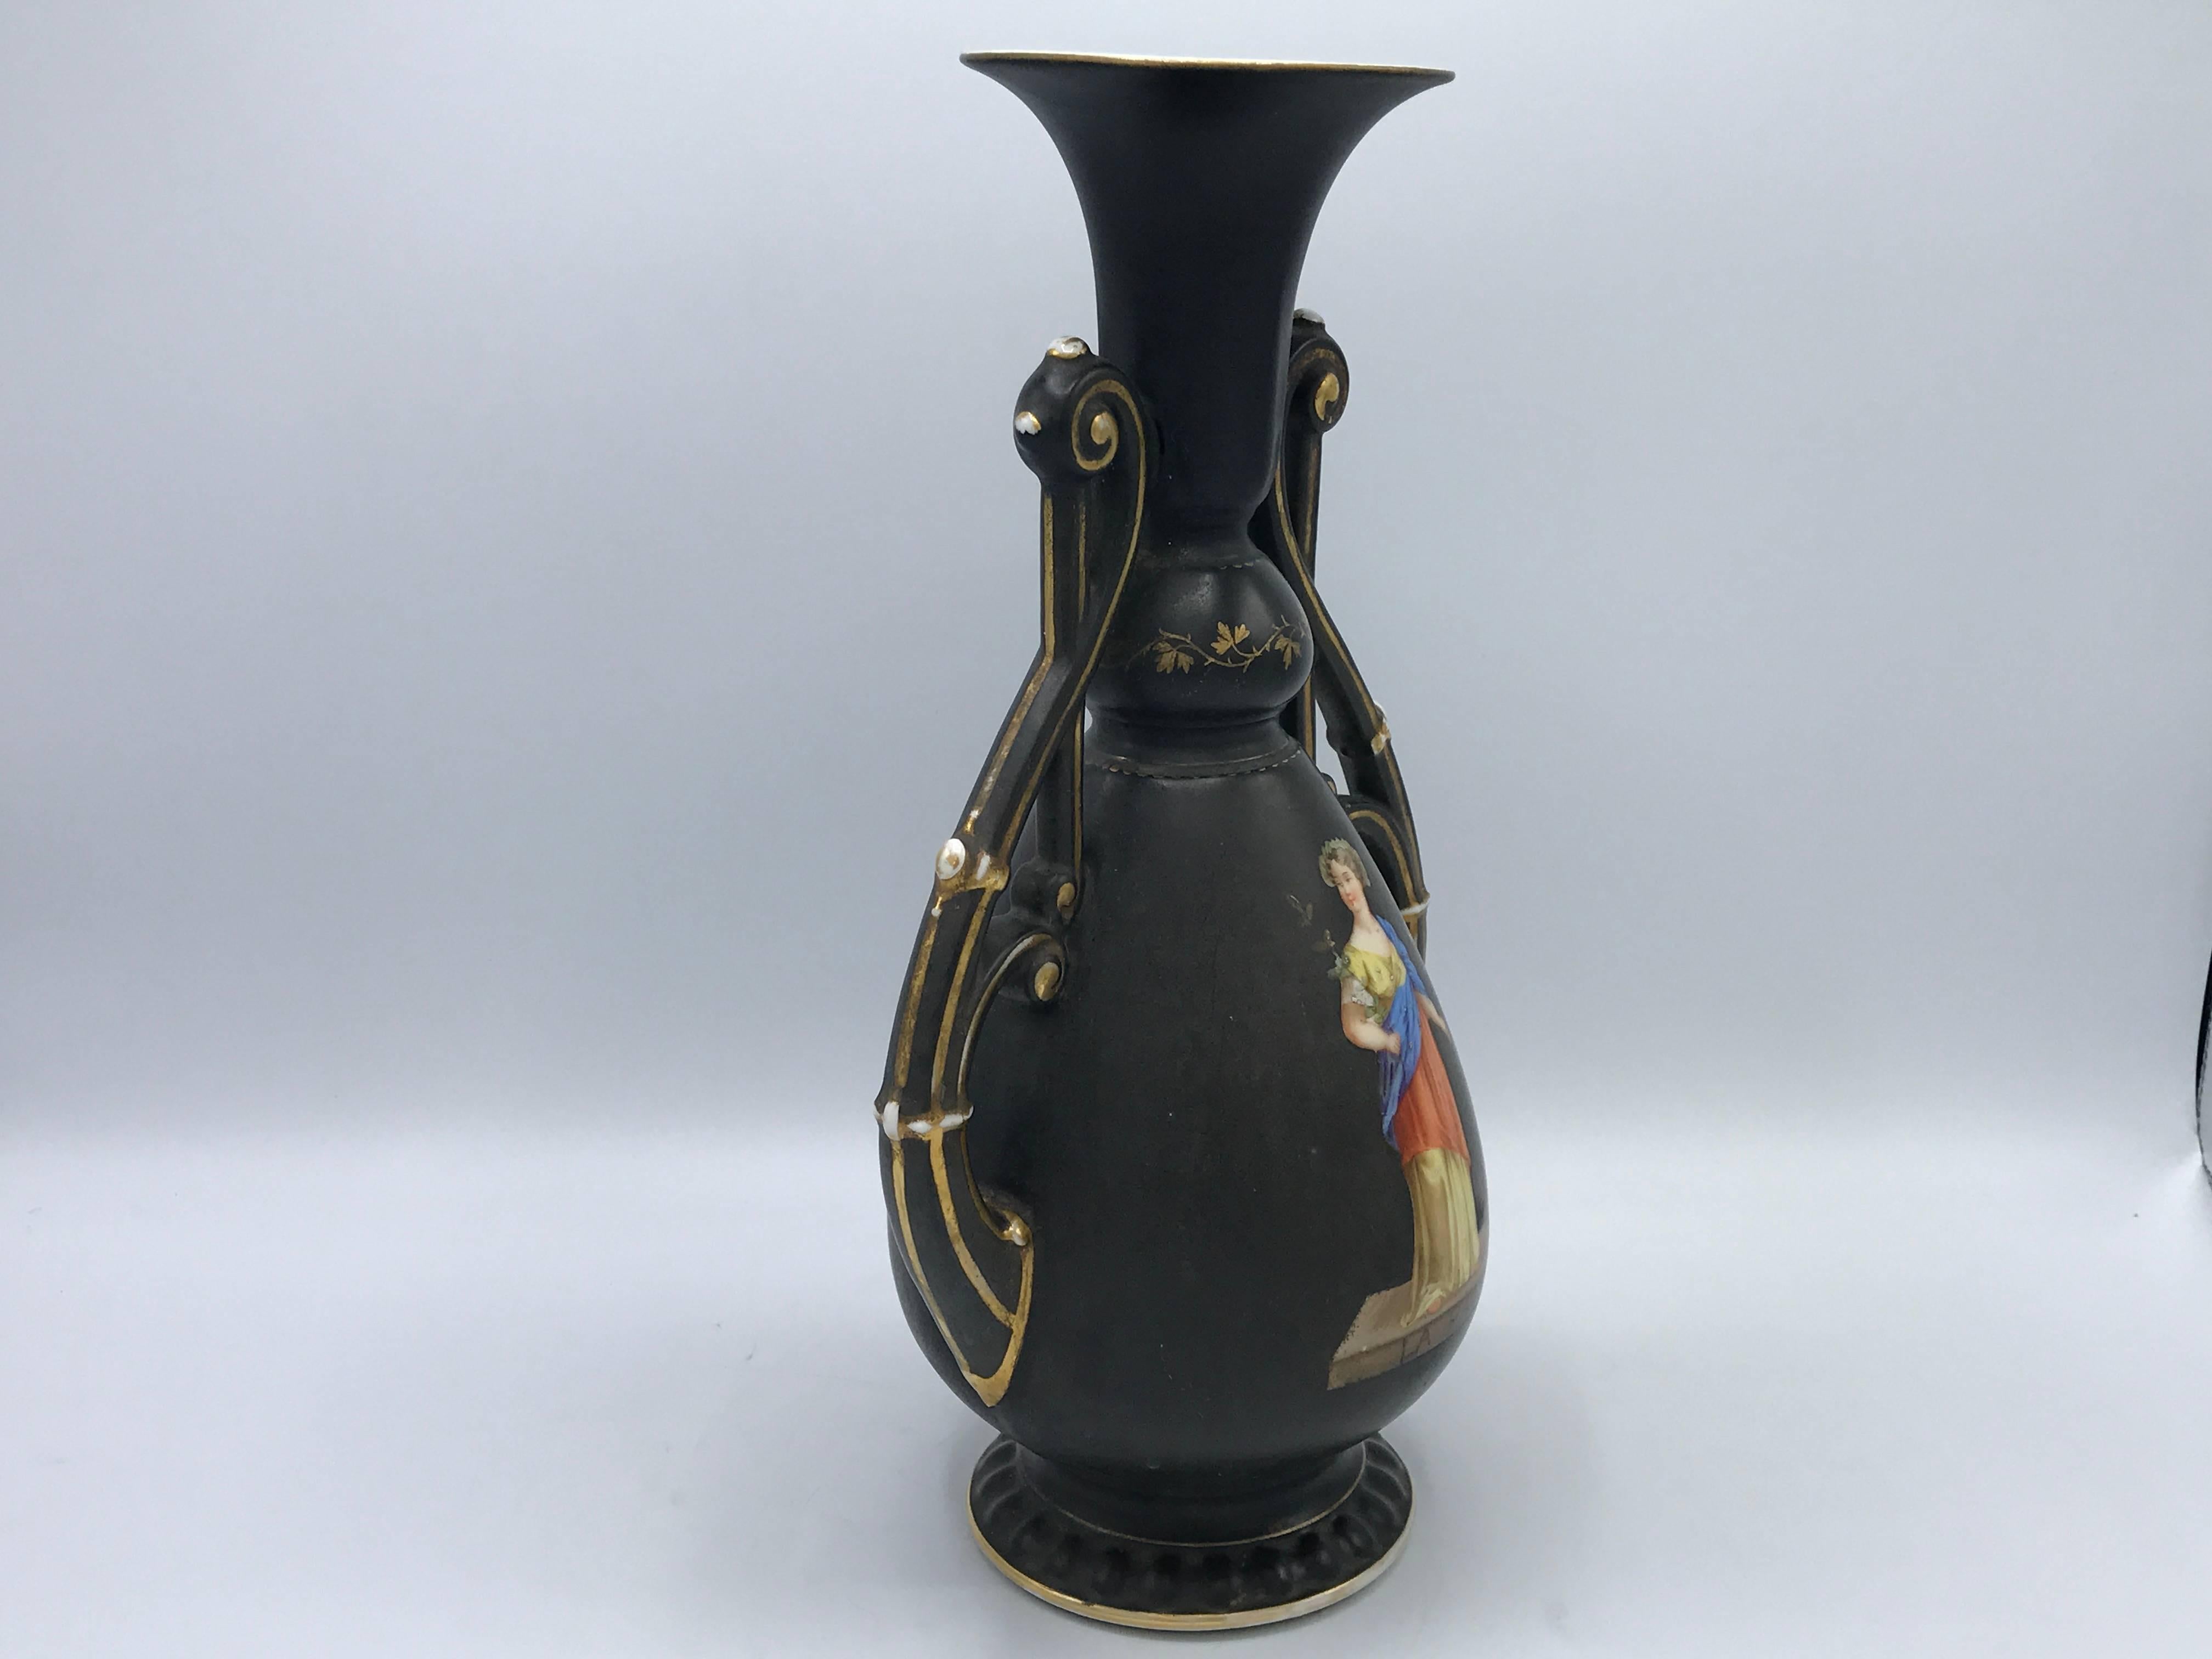 Porcelain 19th Century French Black and Gold Hand-Painted Vase with Handles